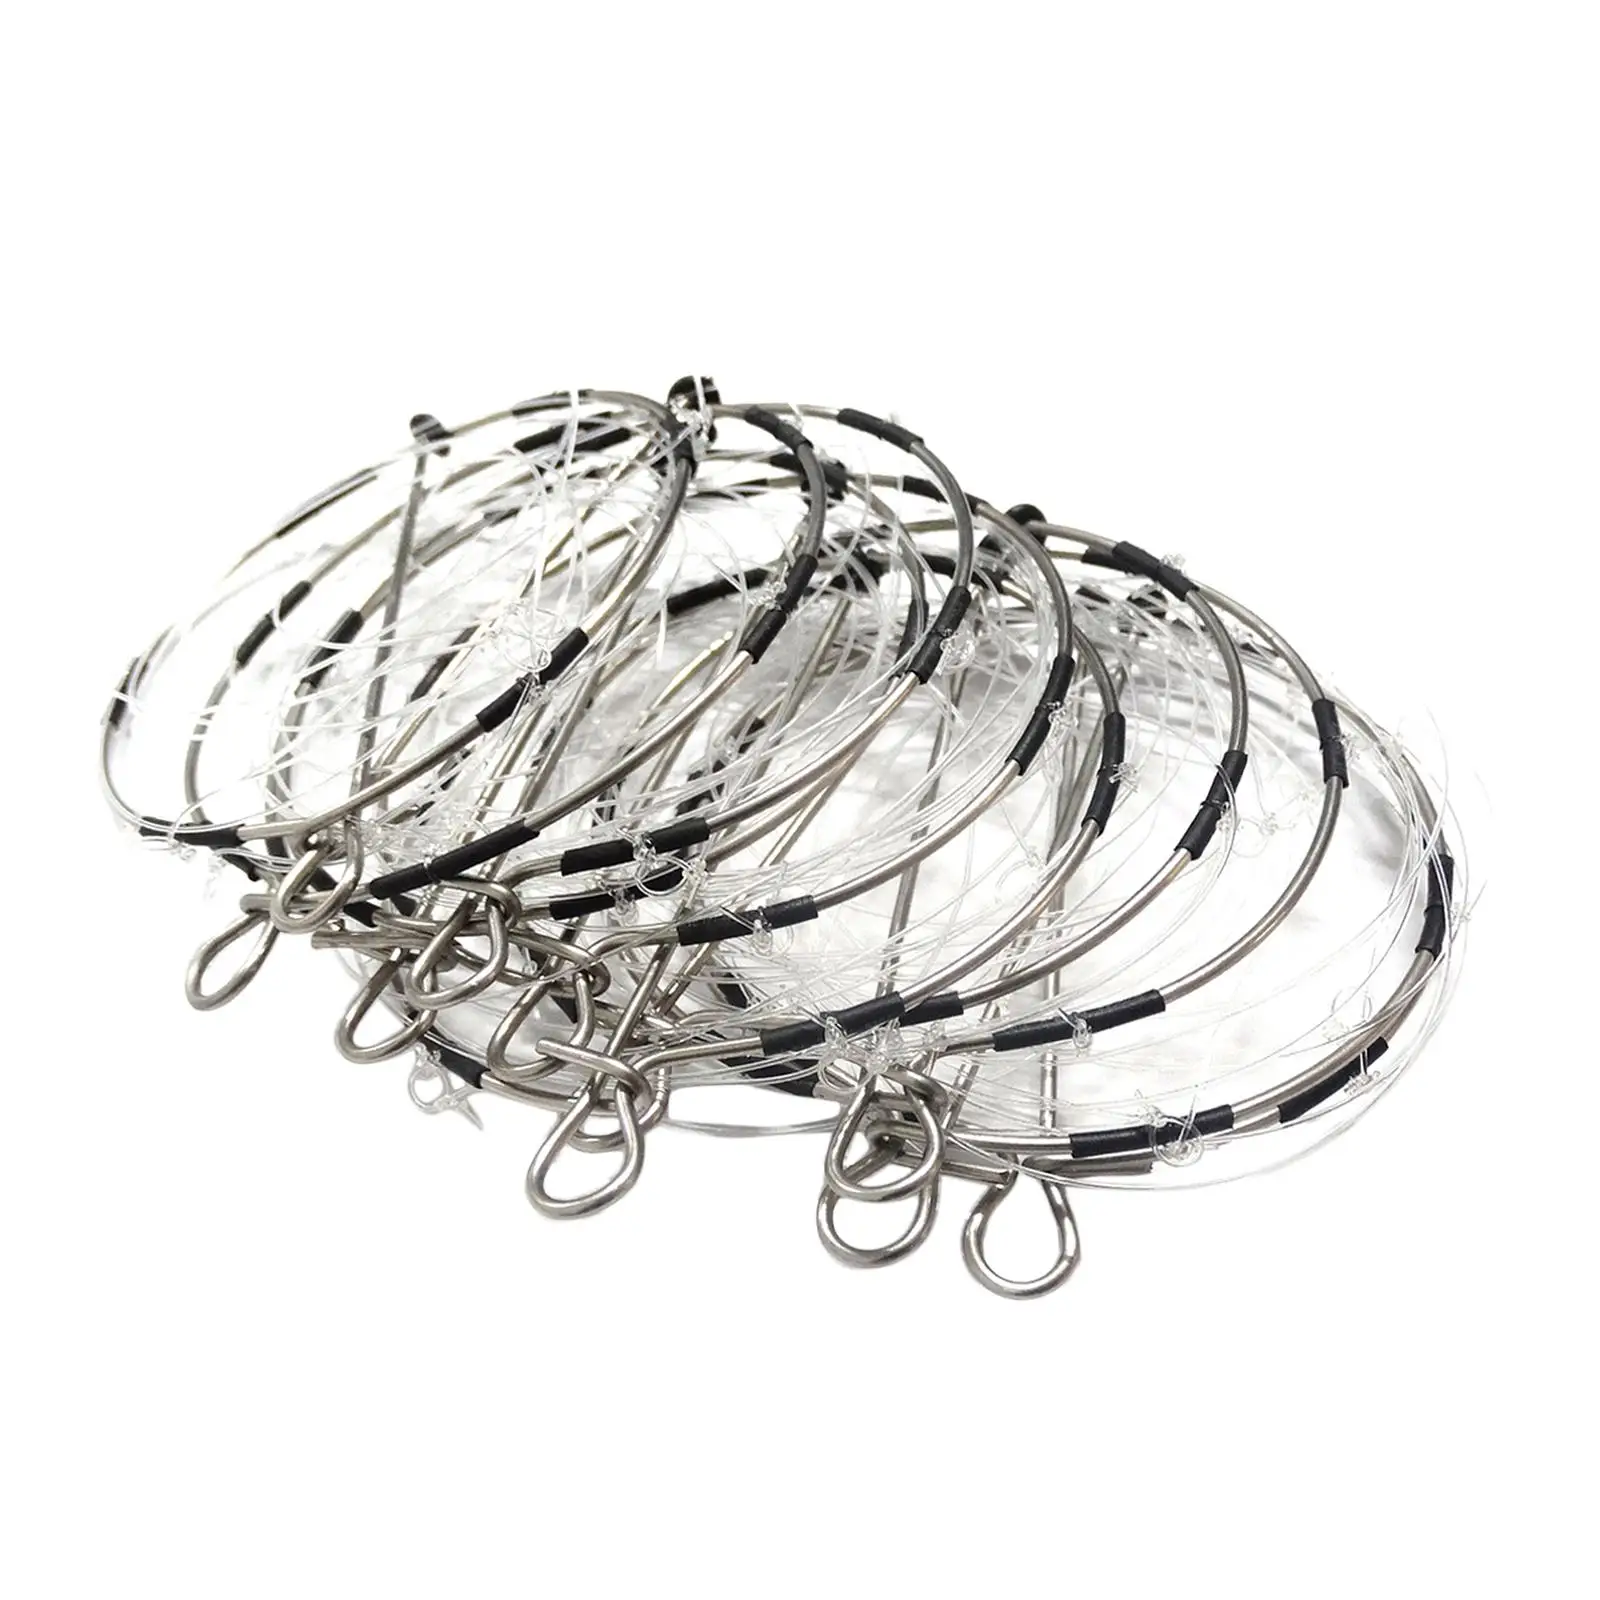 10Pcs Crab Trap Portable Six Movable Buckles Steel Catch Crabs Tool Fishing Bait Trap for Crab Crayfish Prawn shrimp Seaside